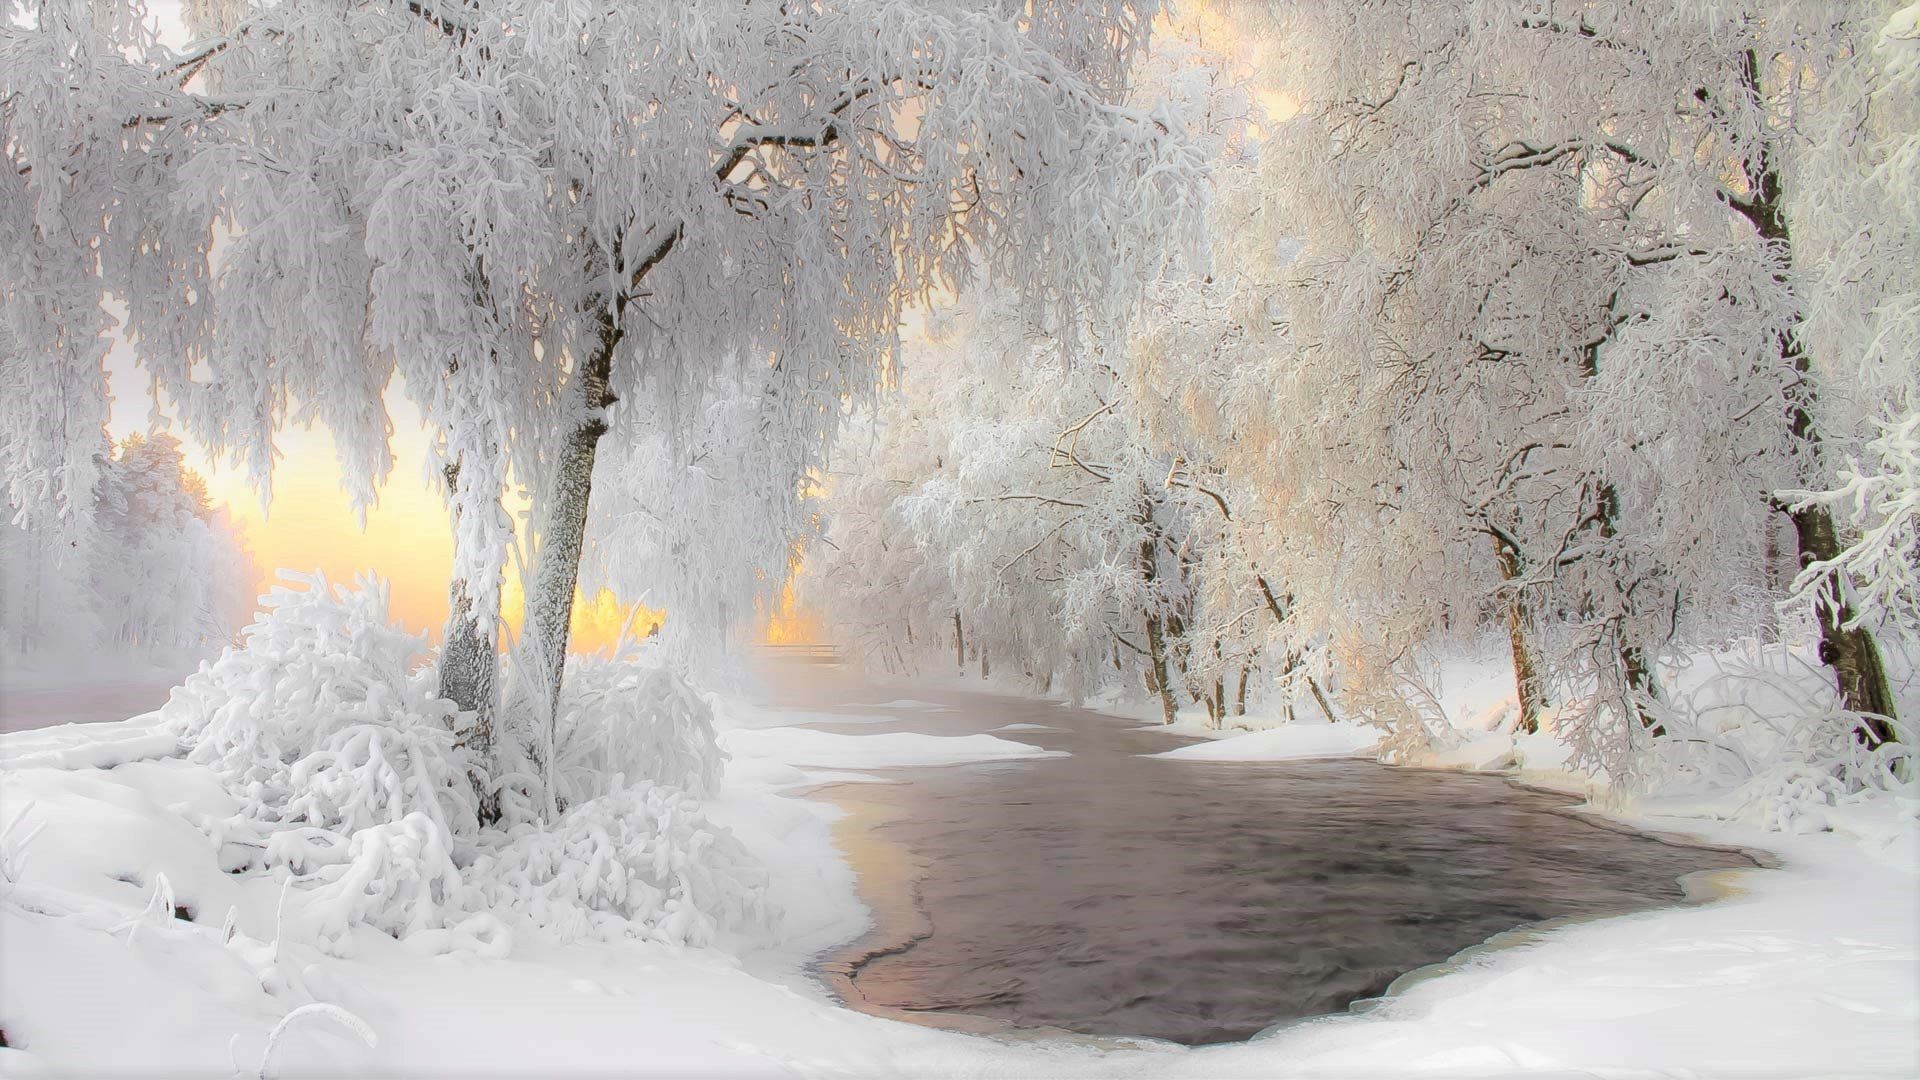 Winter River and Trees at Sunset HD Wallpaper. Background Image